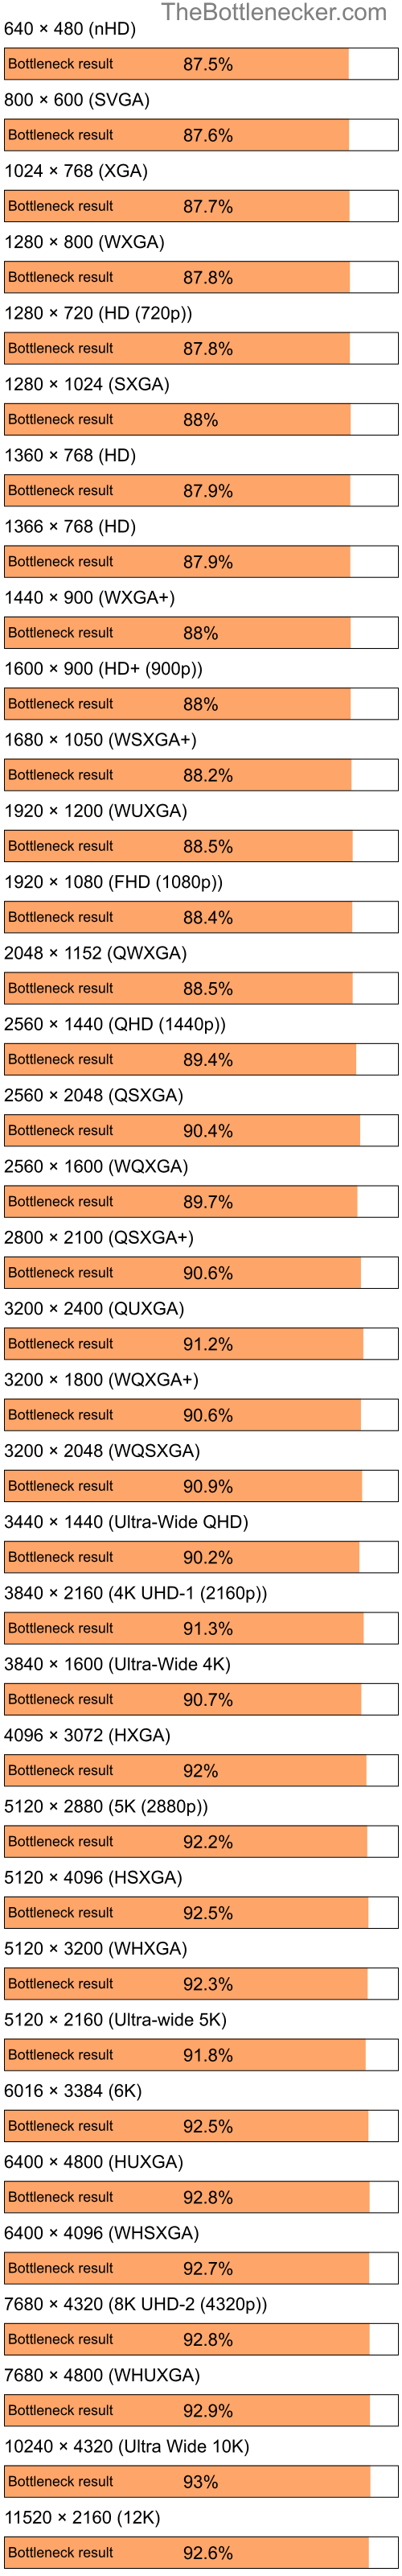 Bottleneck results by resolution for Intel Atom Z520 and NVIDIA nForce 610M in Graphic Card Intense Tasks